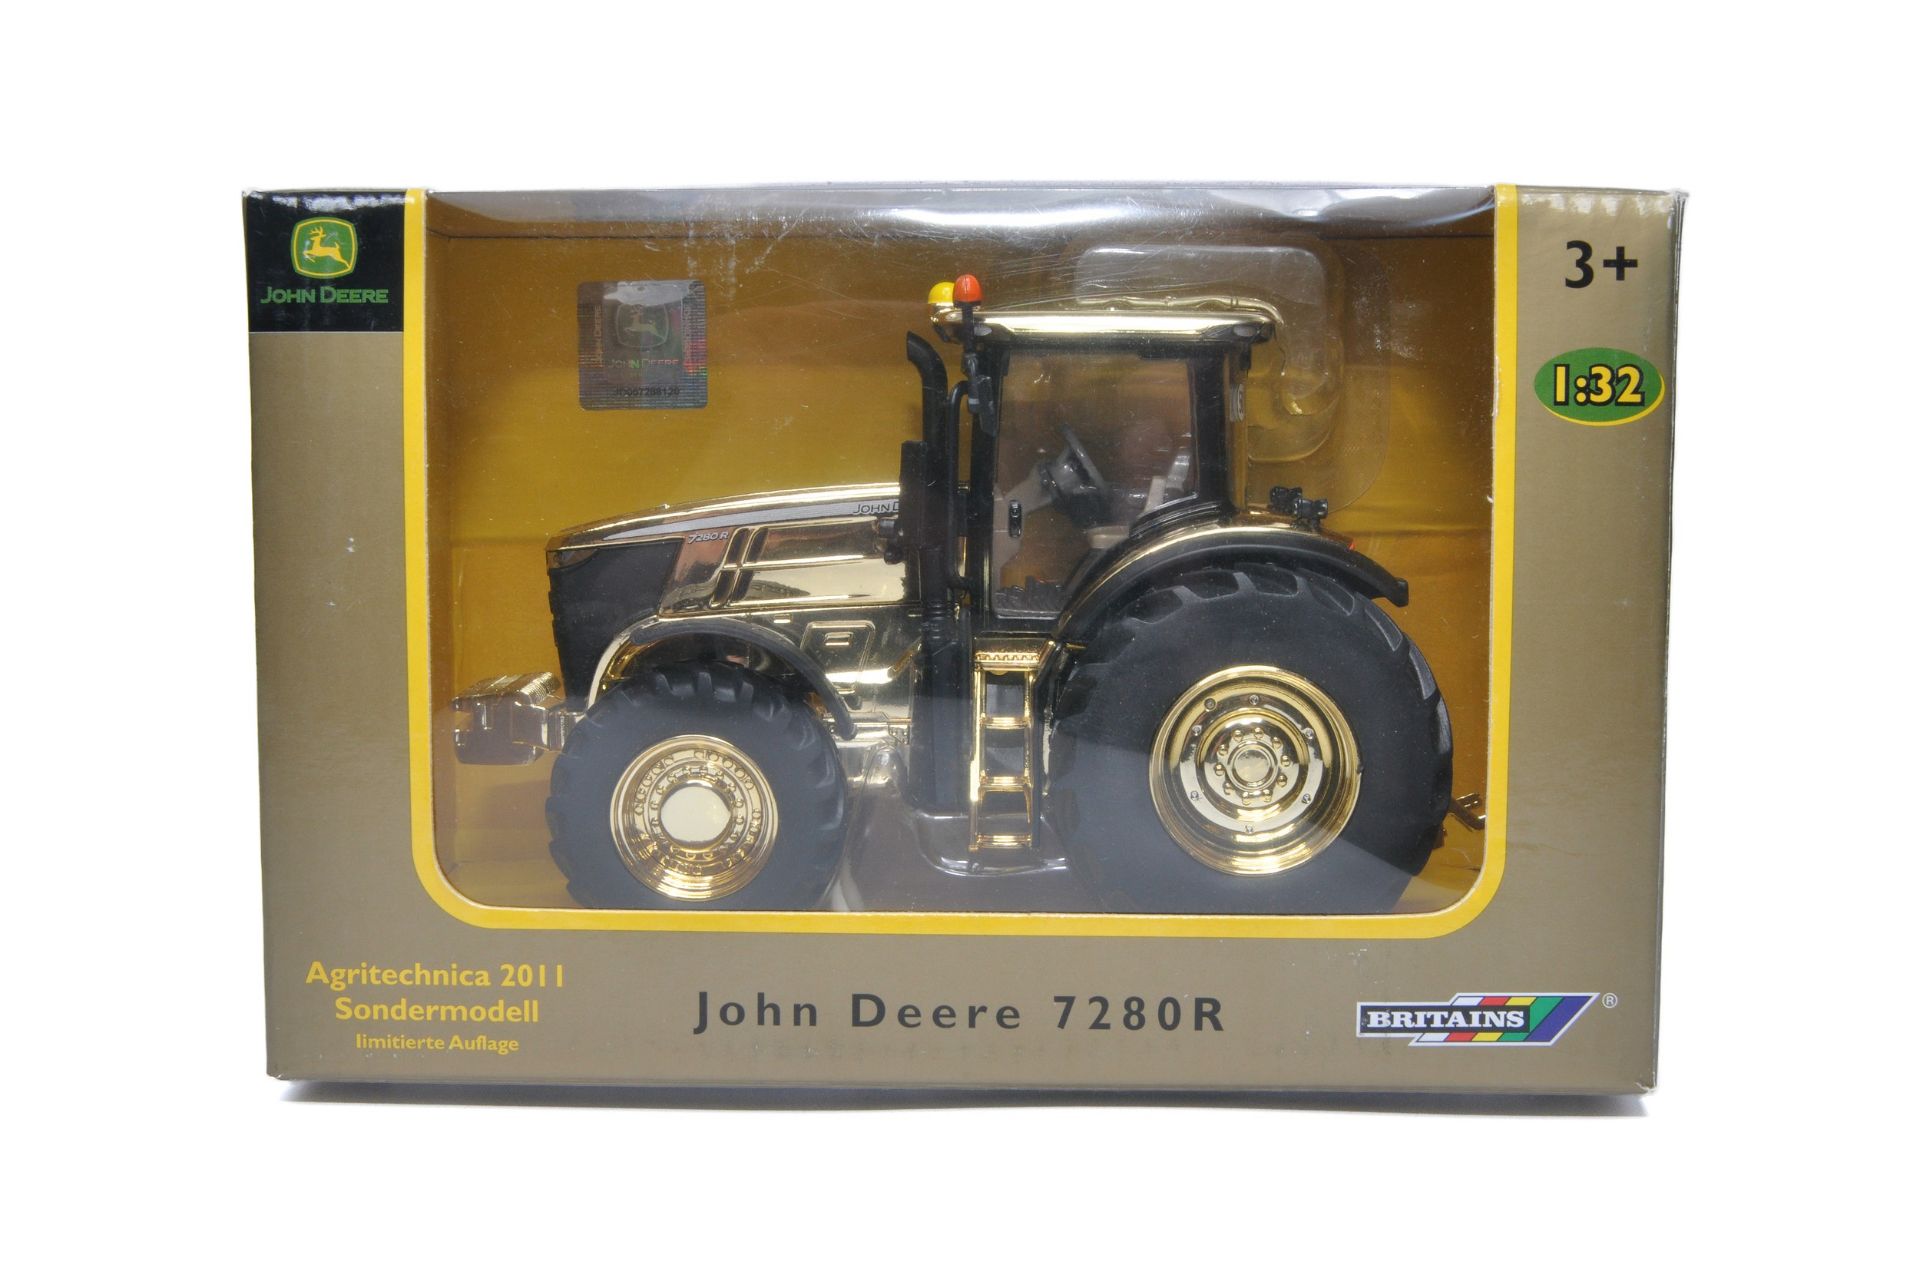 Britains Farm No. 42725 John Deere 7280R Tractor. Special Gold Edition for Agritechnica 2011. - Image 3 of 7